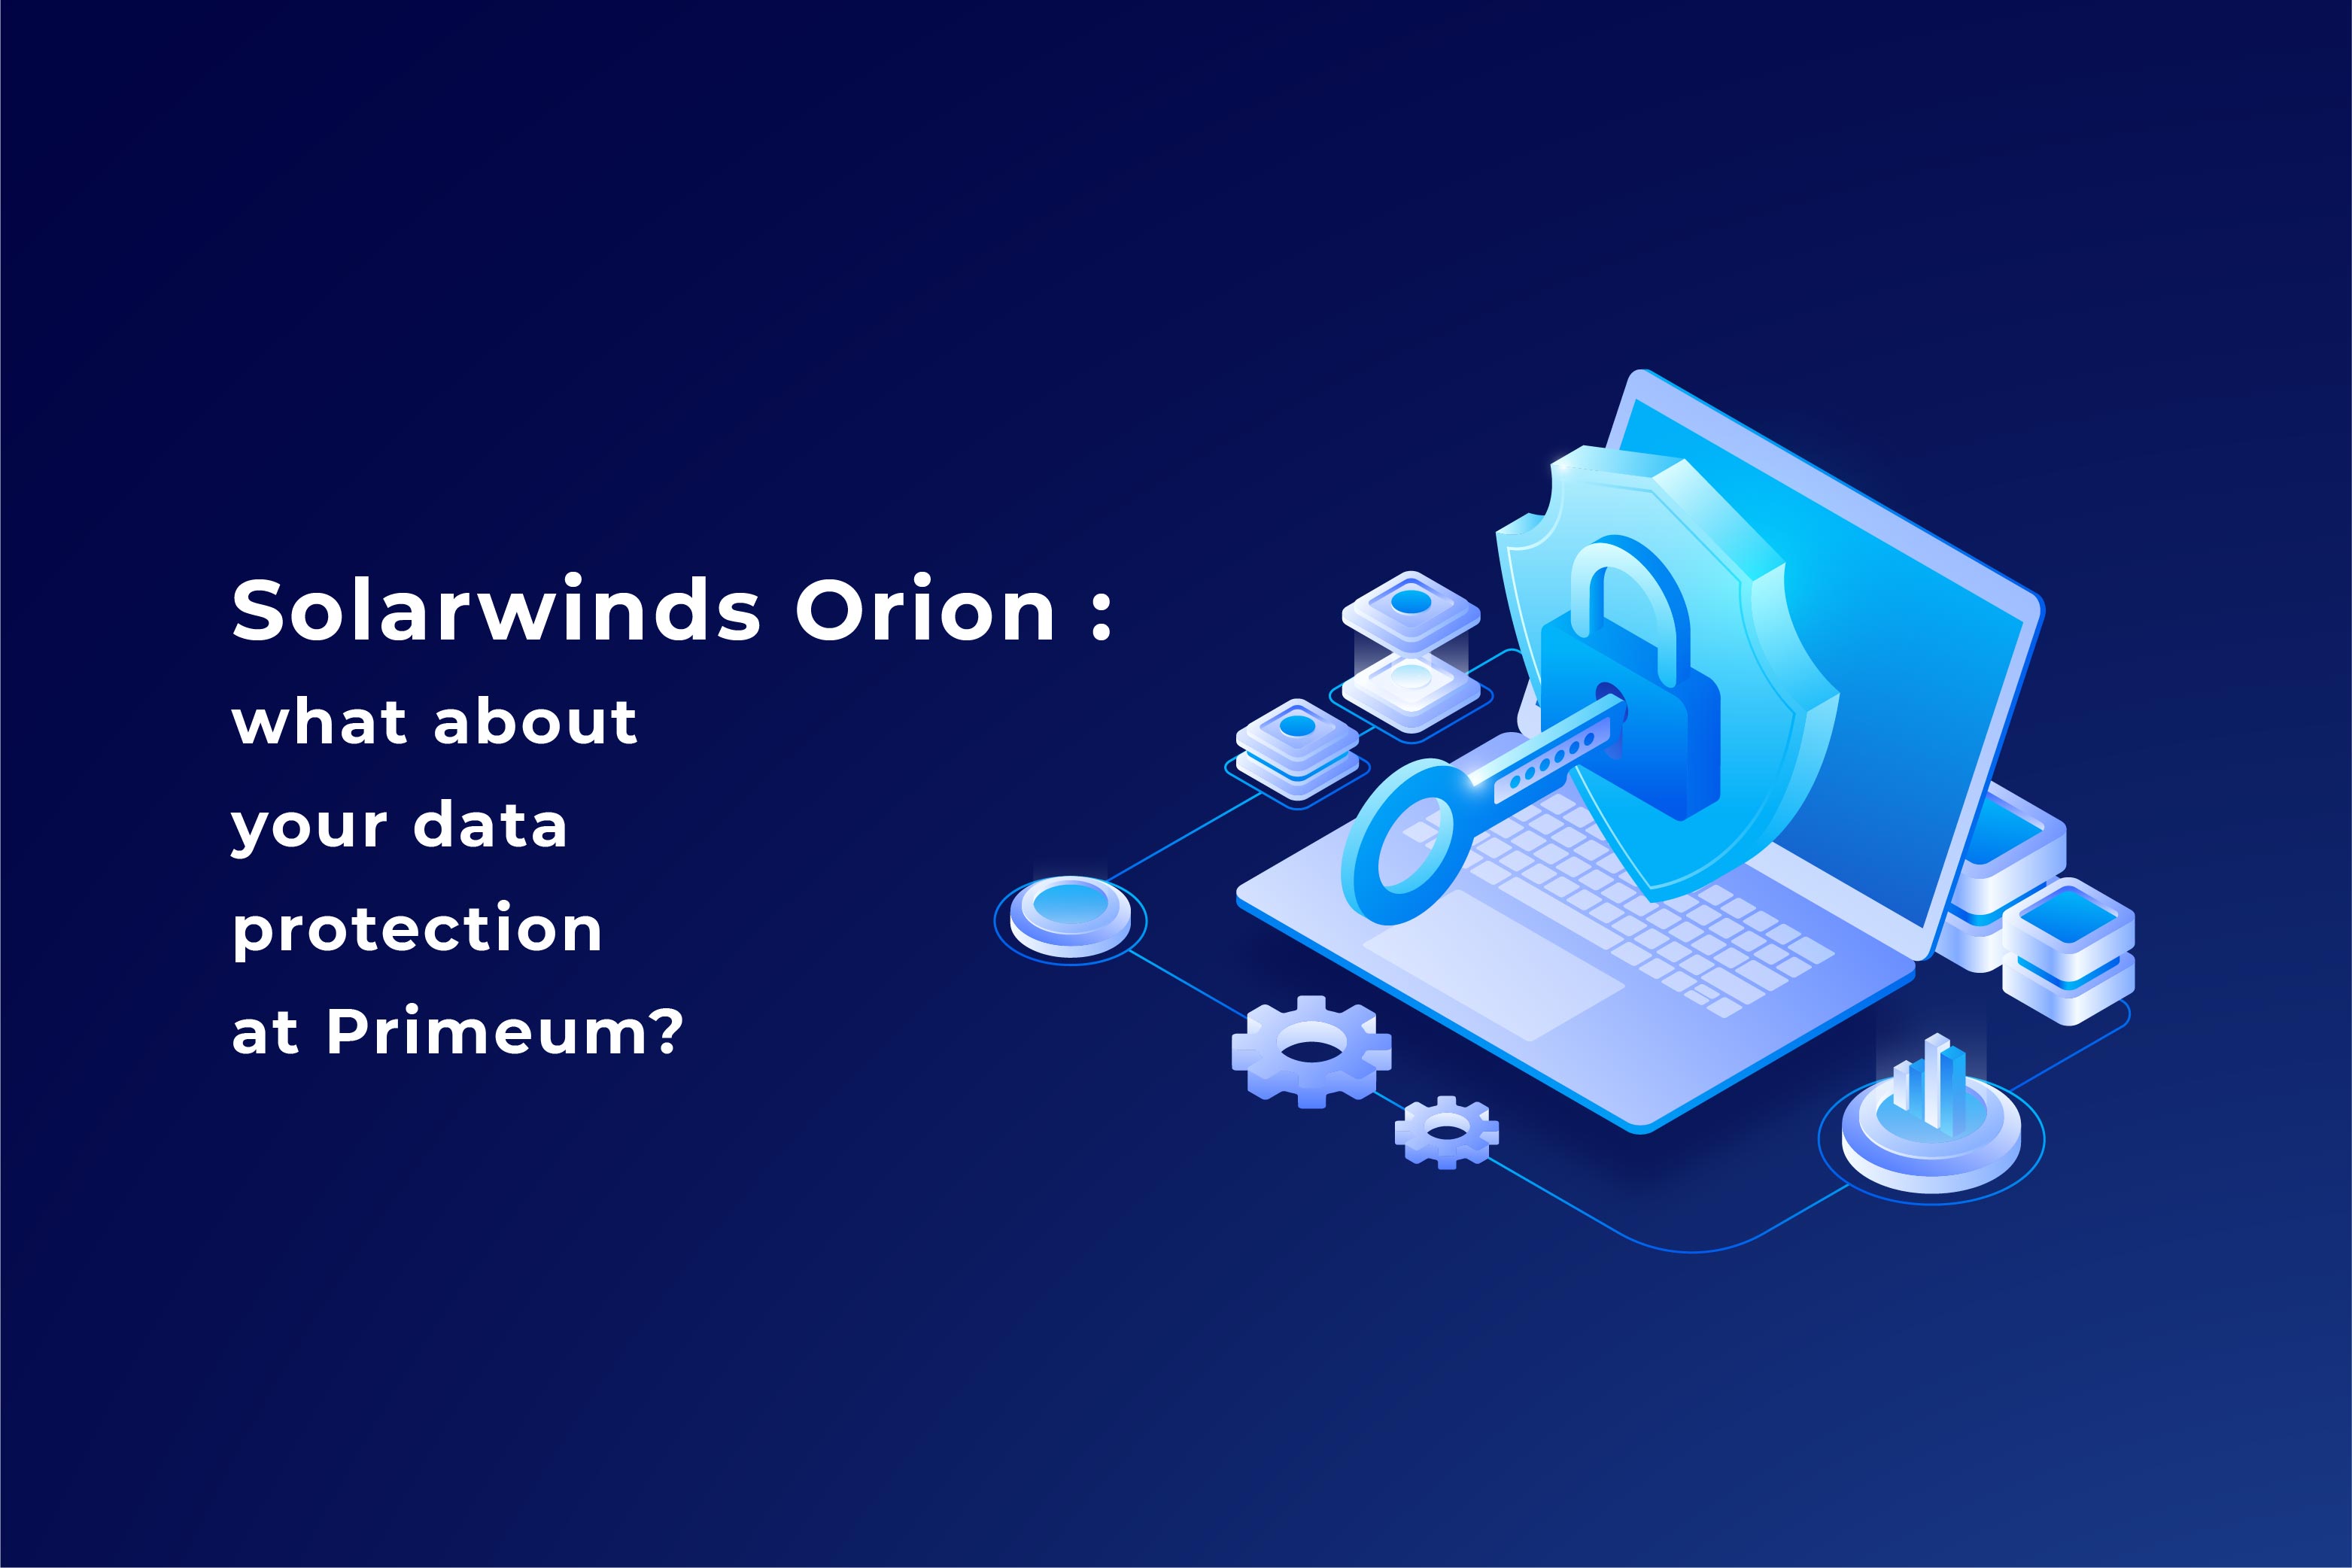 Solarwinds Orion: what about your data protection at Primeum?